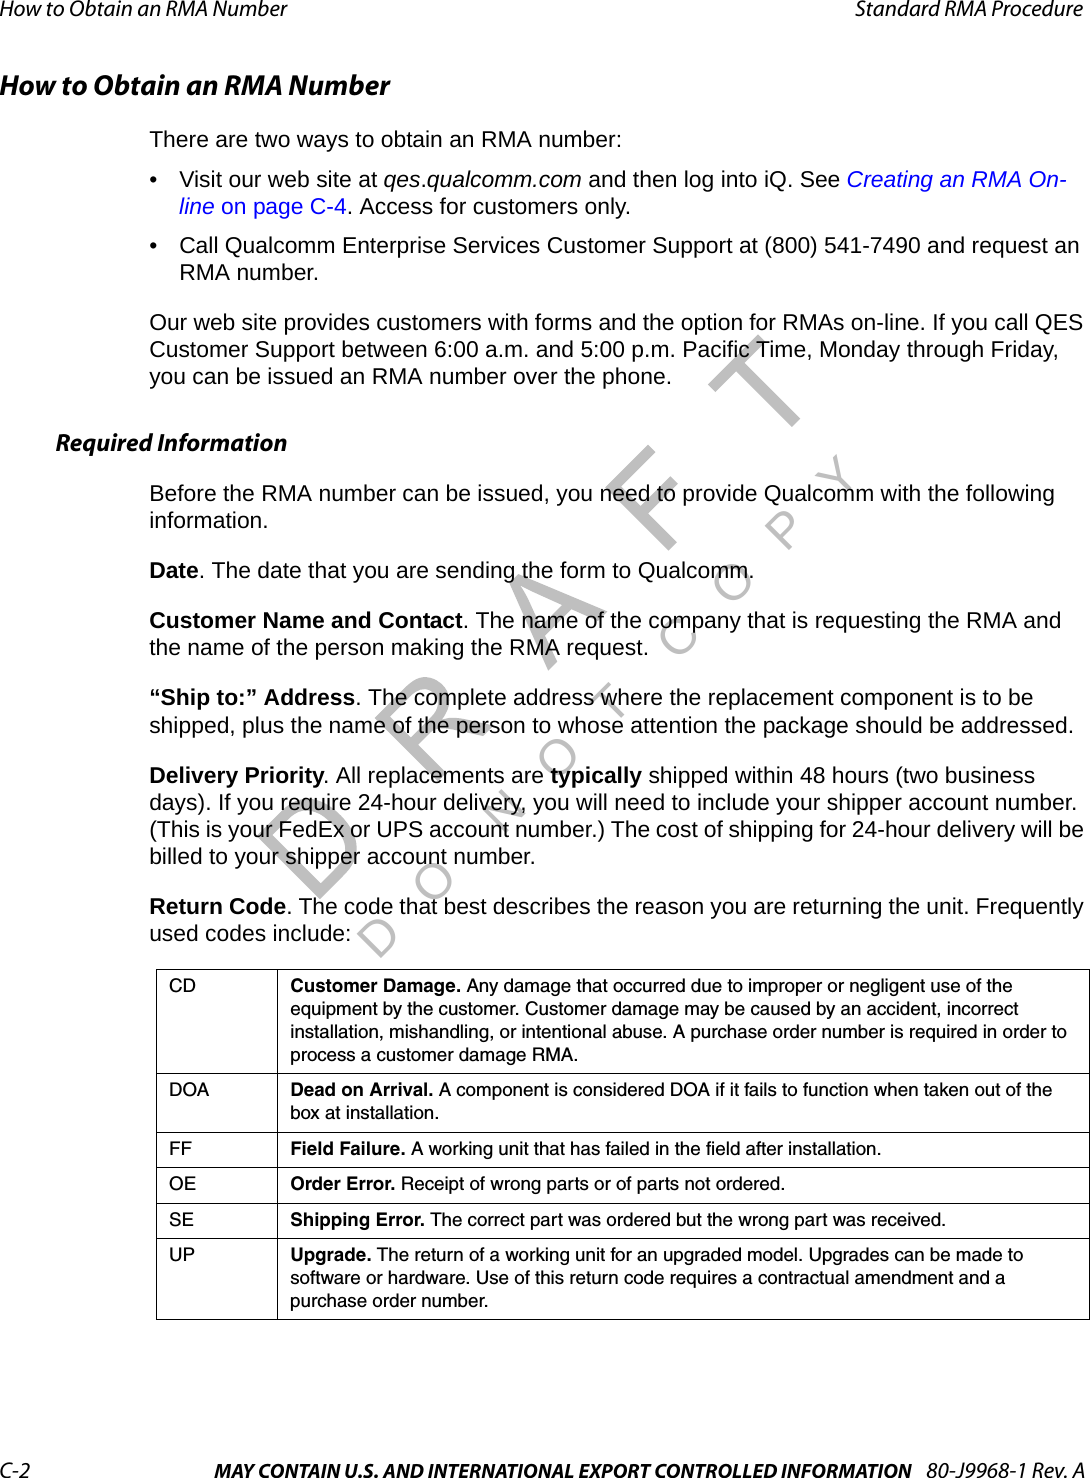 How to Obtain an RMA Number Standard RMA ProcedureC-2 MAY CONTAIN U.S. AND INTERNATIONAL EXPORT CONTROLLED INFORMATION 80-J9968-1 Rev. ADO NOT COPYHow to Obtain an RMA NumberThere are two ways to obtain an RMA number:• Visit our web site at qes.qualcomm.com and then log into iQ. See Creating an RMA On-line on page C-4. Access for customers only.• Call Qualcomm Enterprise Services Customer Support at (800) 541-7490 and request an RMA number.Our web site provides customers with forms and the option for RMAs on-line. If you call QES Customer Support between 6:00 a.m. and 5:00 p.m. Pacific Time, Monday through Friday, you can be issued an RMA number over the phone.Required InformationBefore the RMA number can be issued, you need to provide Qualcomm with the following information. Date. The date that you are sending the form to Qualcomm.Customer Name and Contact. The name of the company that is requesting the RMA and the name of the person making the RMA request. “Ship to:” Address. The complete address where the replacement component is to be shipped, plus the name of the person to whose attention the package should be addressed.Delivery Priority. All replacements are typically shipped within 48 hours (two business days). If you require 24-hour delivery, you will need to include your shipper account number. (This is your FedEx or UPS account number.) The cost of shipping for 24-hour delivery will be billed to your shipper account number.Return Code. The code that best describes the reason you are returning the unit. Frequently used codes include:CD Customer Damage. Any damage that occurred due to improper or negligent use of the equipment by the customer. Customer damage may be caused by an accident, incorrect installation, mishandling, or intentional abuse. A purchase order number is required in order to process a customer damage RMA.DOA Dead on Arrival. A component is considered DOA if it fails to function when taken out of the box at installation.FF Field Failure. A working unit that has failed in the field after installation.OE Order Error. Receipt of wrong parts or of parts not ordered.SE Shipping Error. The correct part was ordered but the wrong part was received.UP Upgrade. The return of a working unit for an upgraded model. Upgrades can be made to software or hardware. Use of this return code requires a contractual amendment and a purchase order number. 